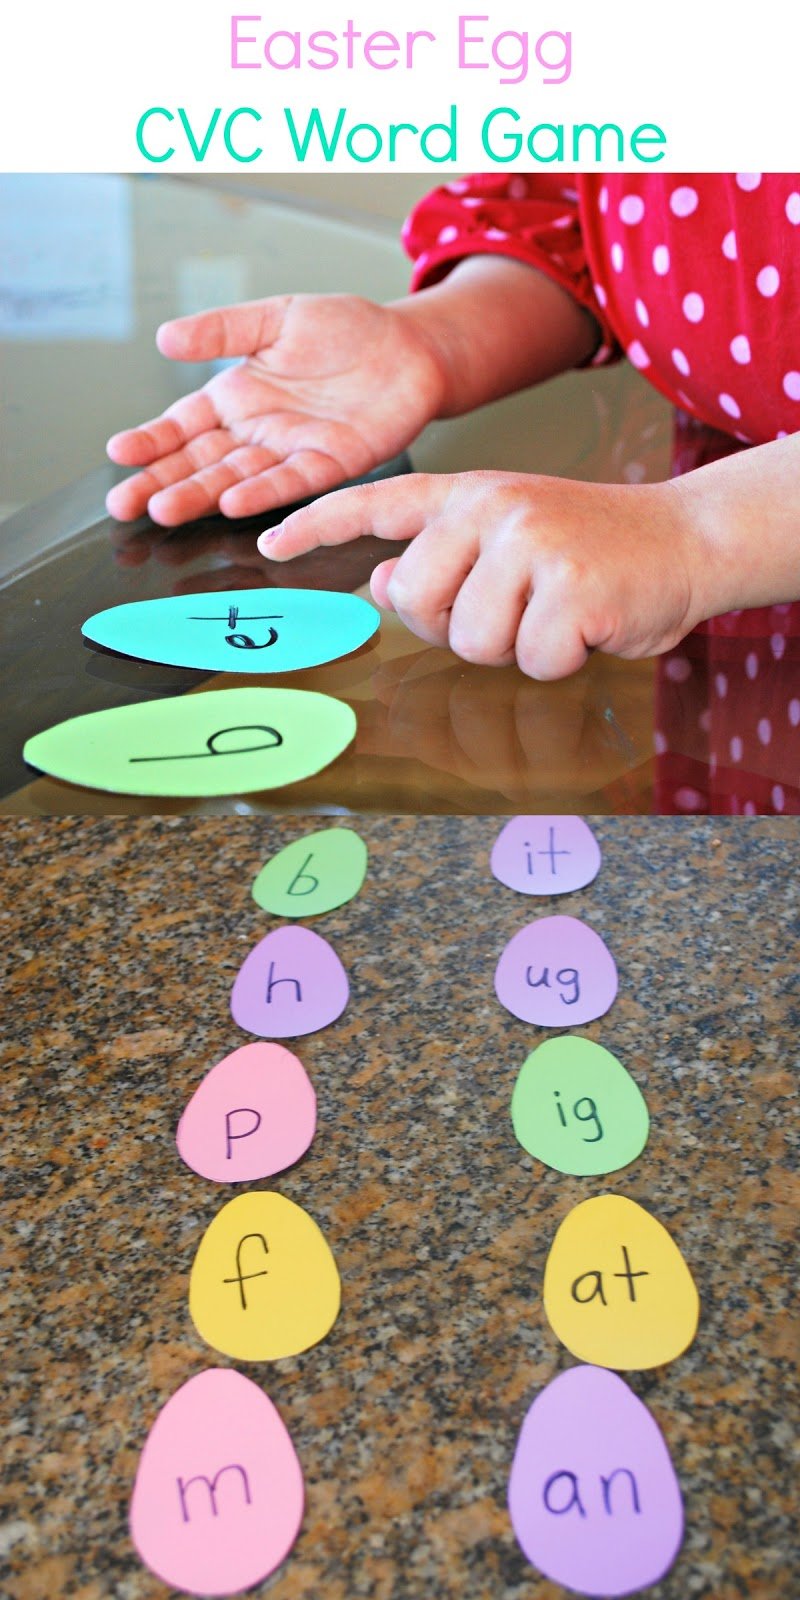 Easter Egg CVC Word Game - Easy to make game helps kids learn to make words.